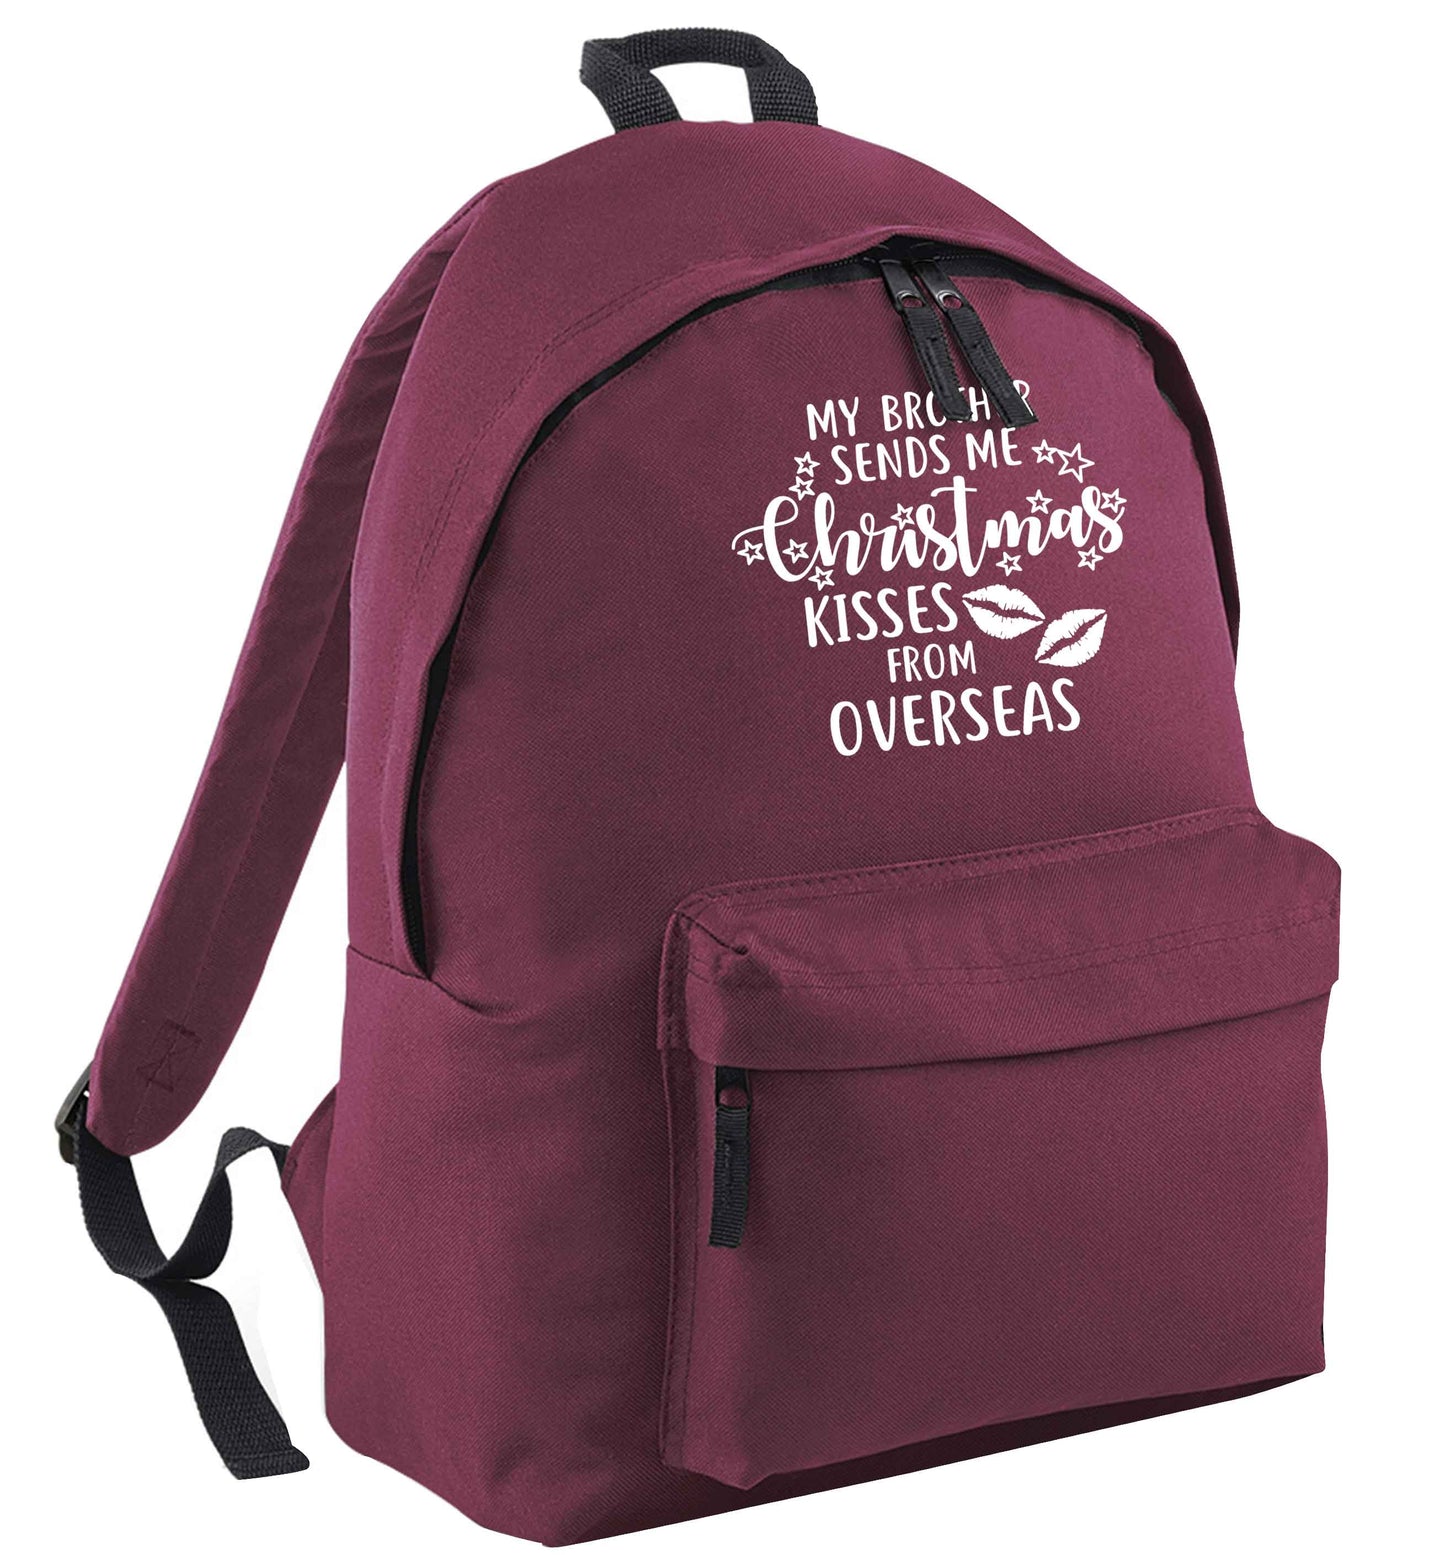 Brother Christmas Kisses Overseas maroon adults backpack